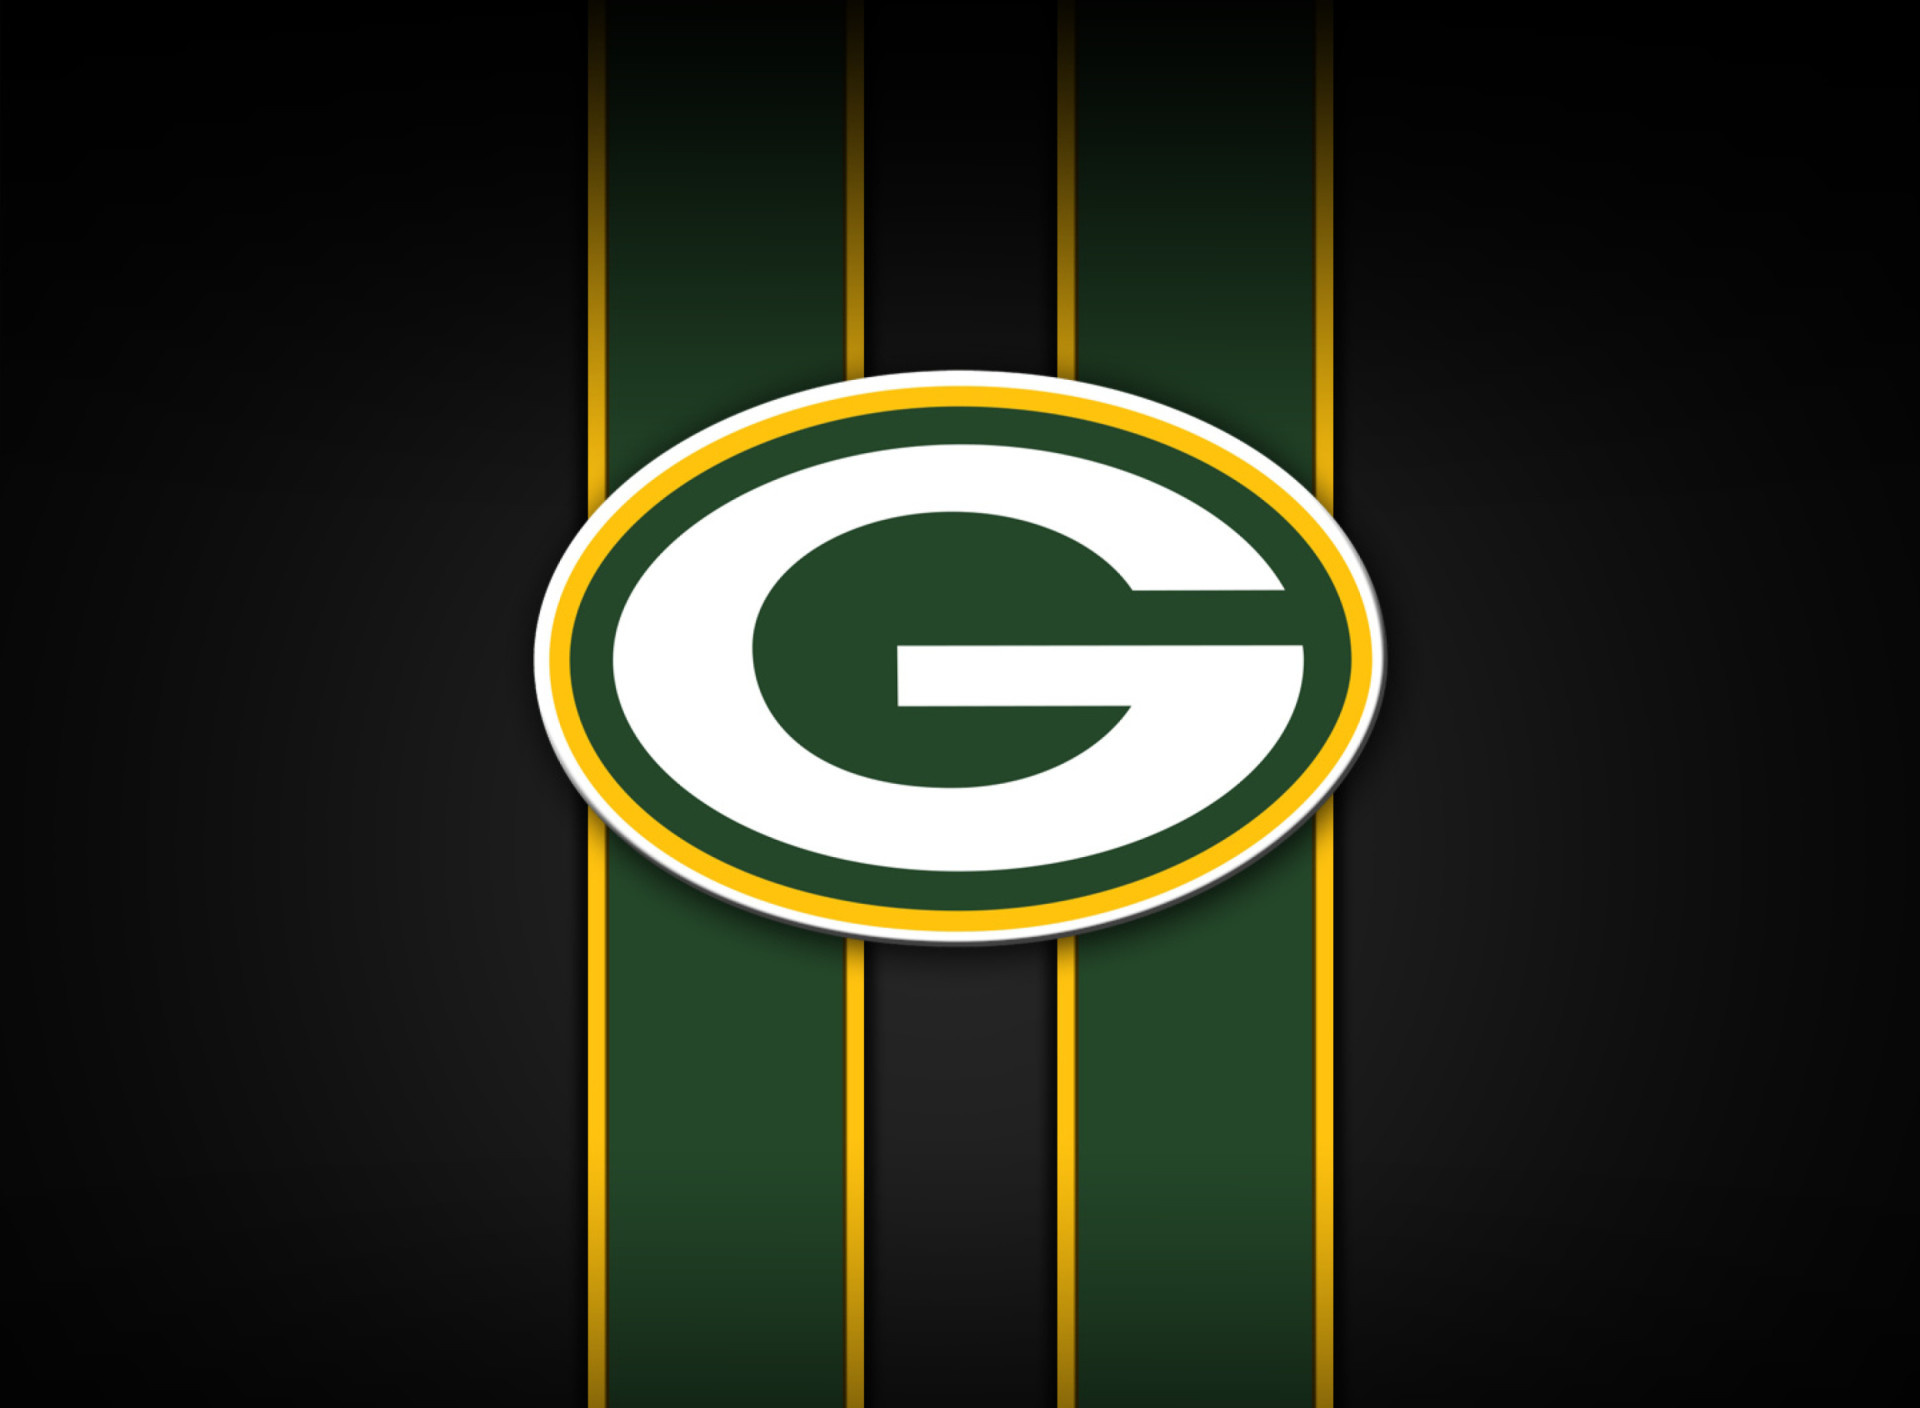 Green Bay Packers: The Super Bowl win came in the 1996 season under head coach Mike Holmgren. 1920x1410 HD Wallpaper.